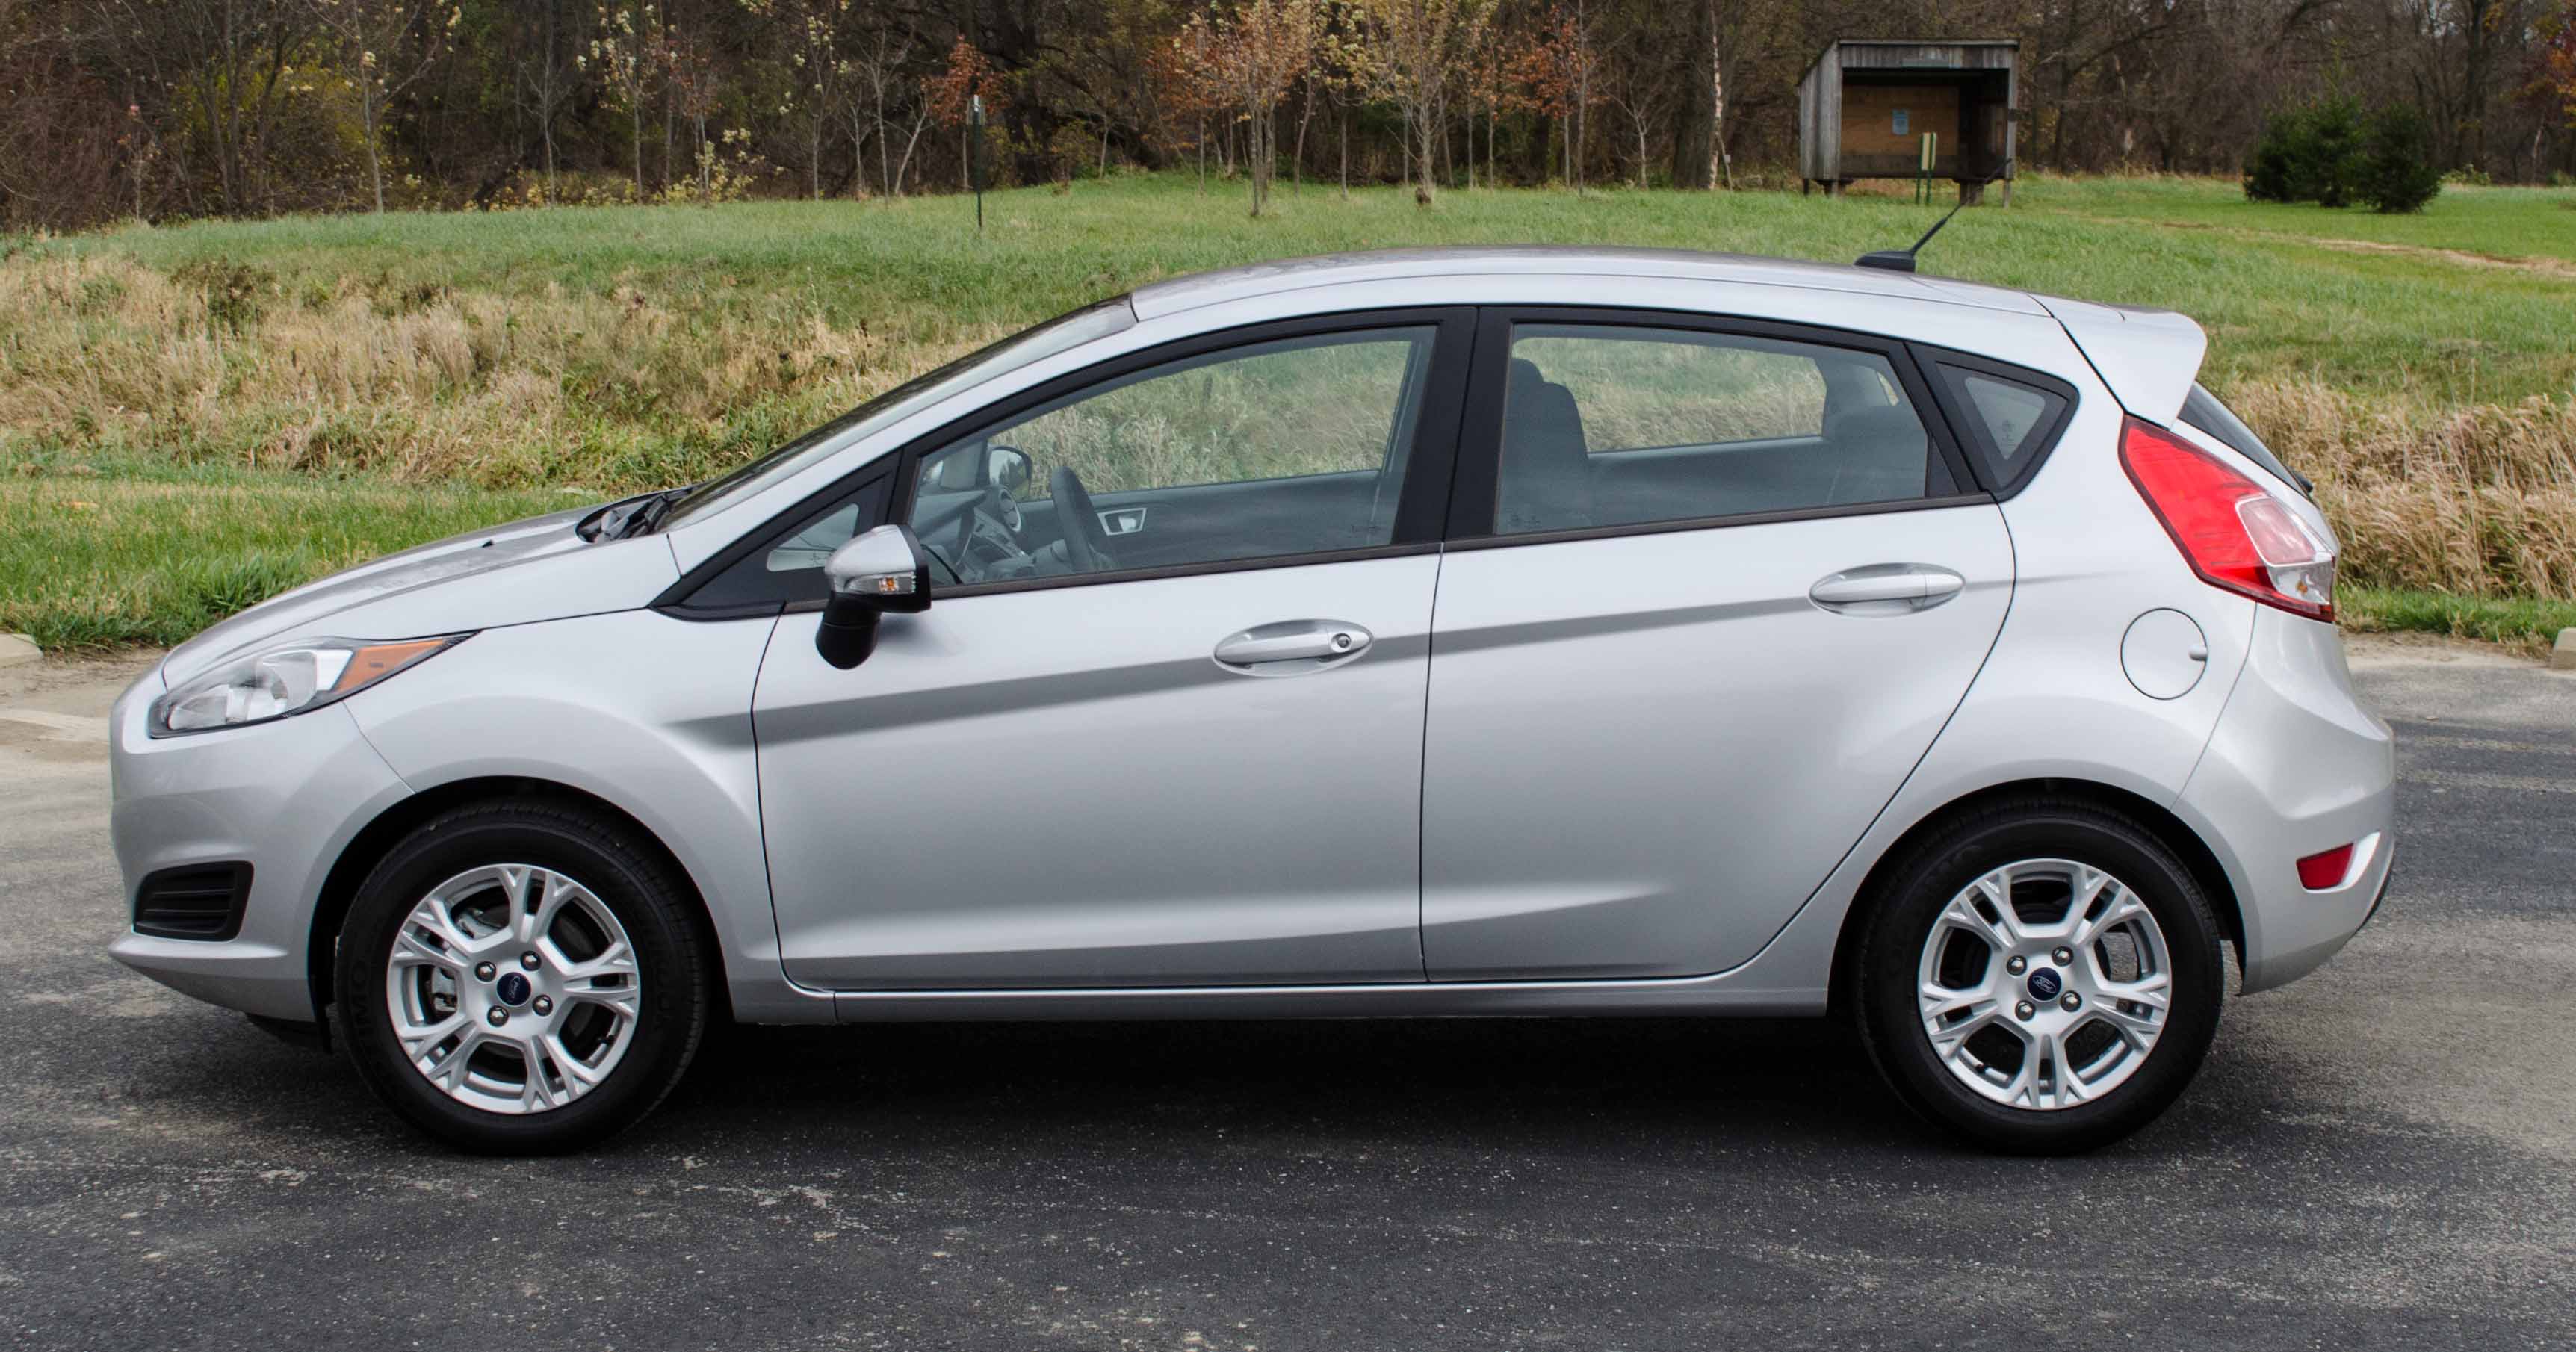 2014 Ford Fiesta SE Delivers More Than Just the Basics
